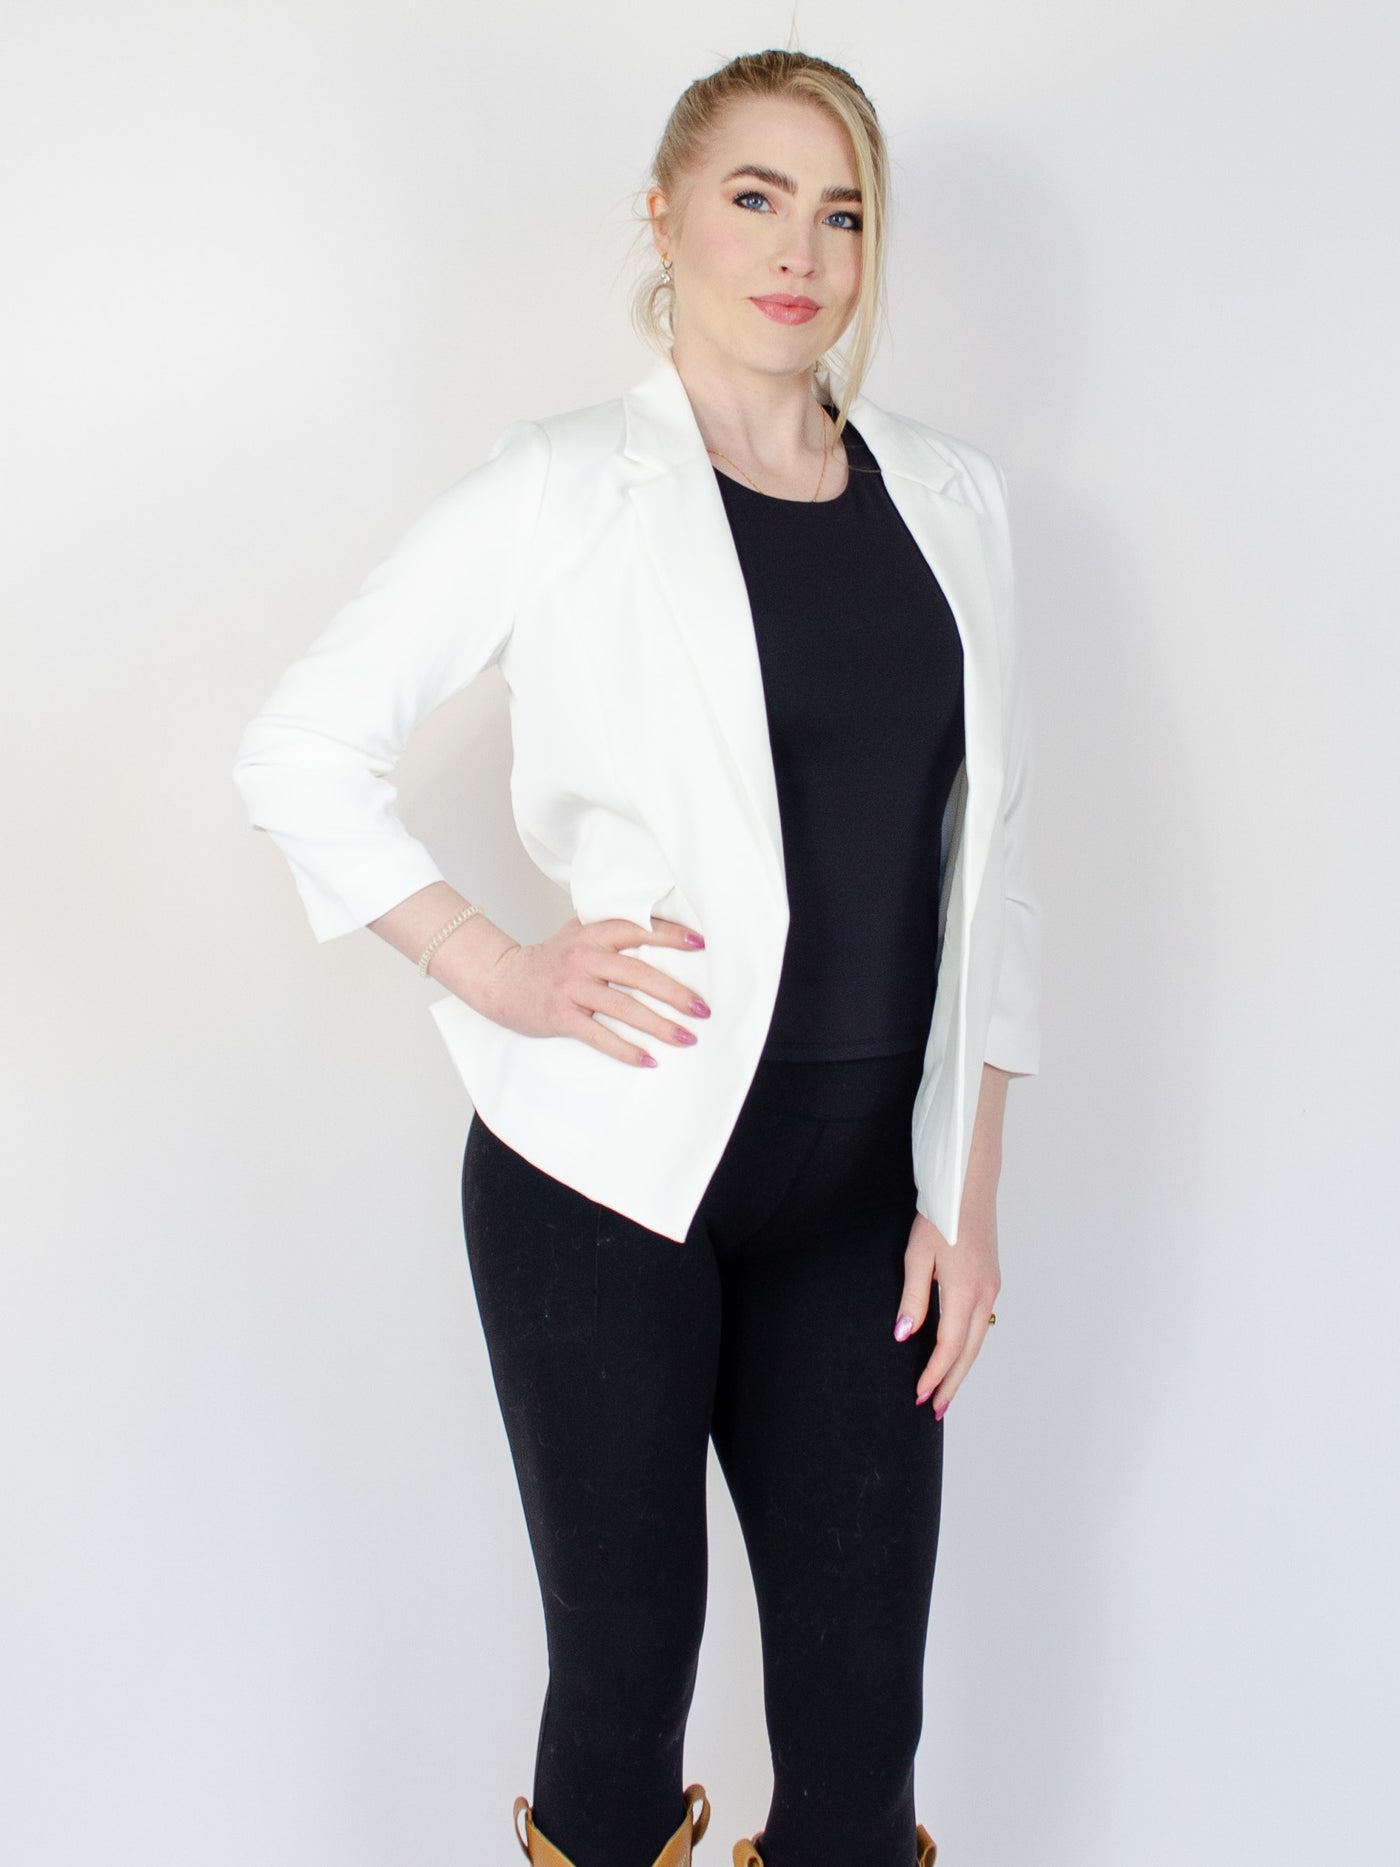 Model is wearing a white fitted blazer.